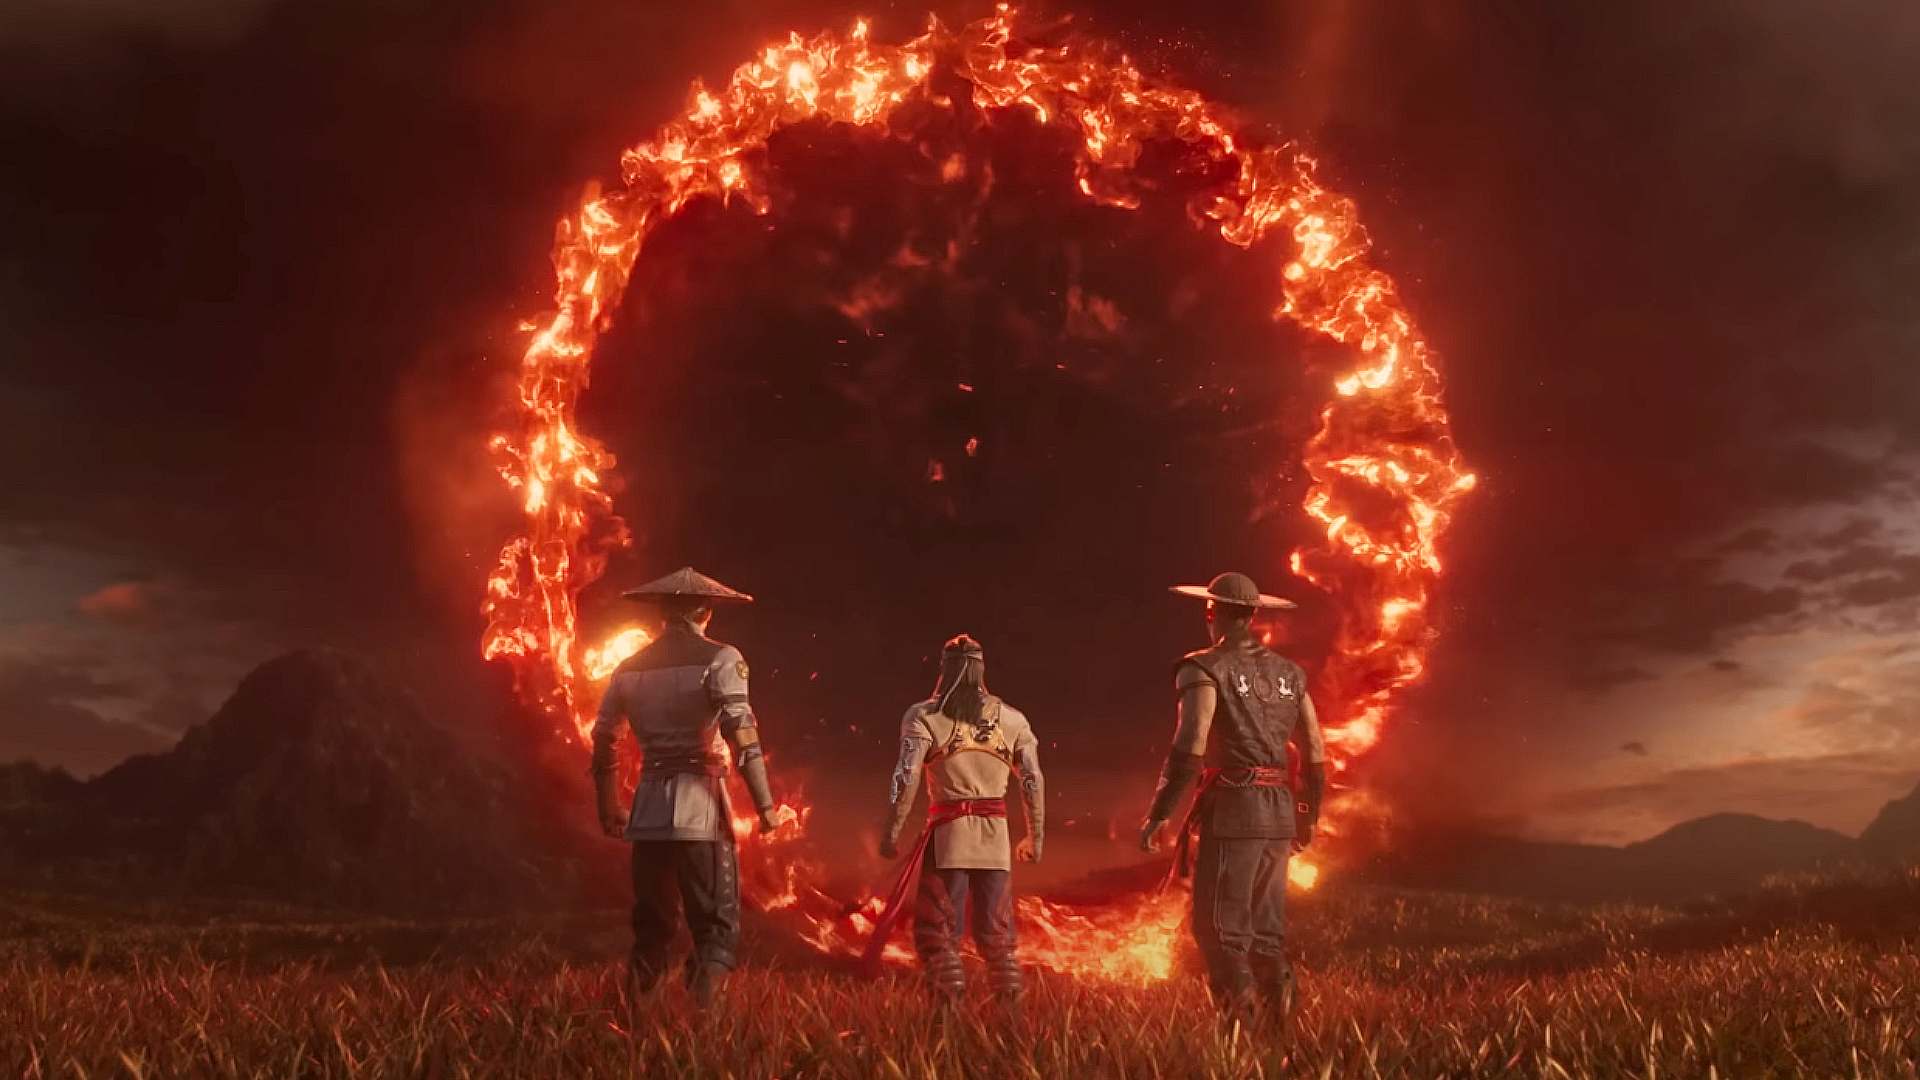 Mrotal Kombat 1 screenshots with characters looking at red glowing circle in the sky